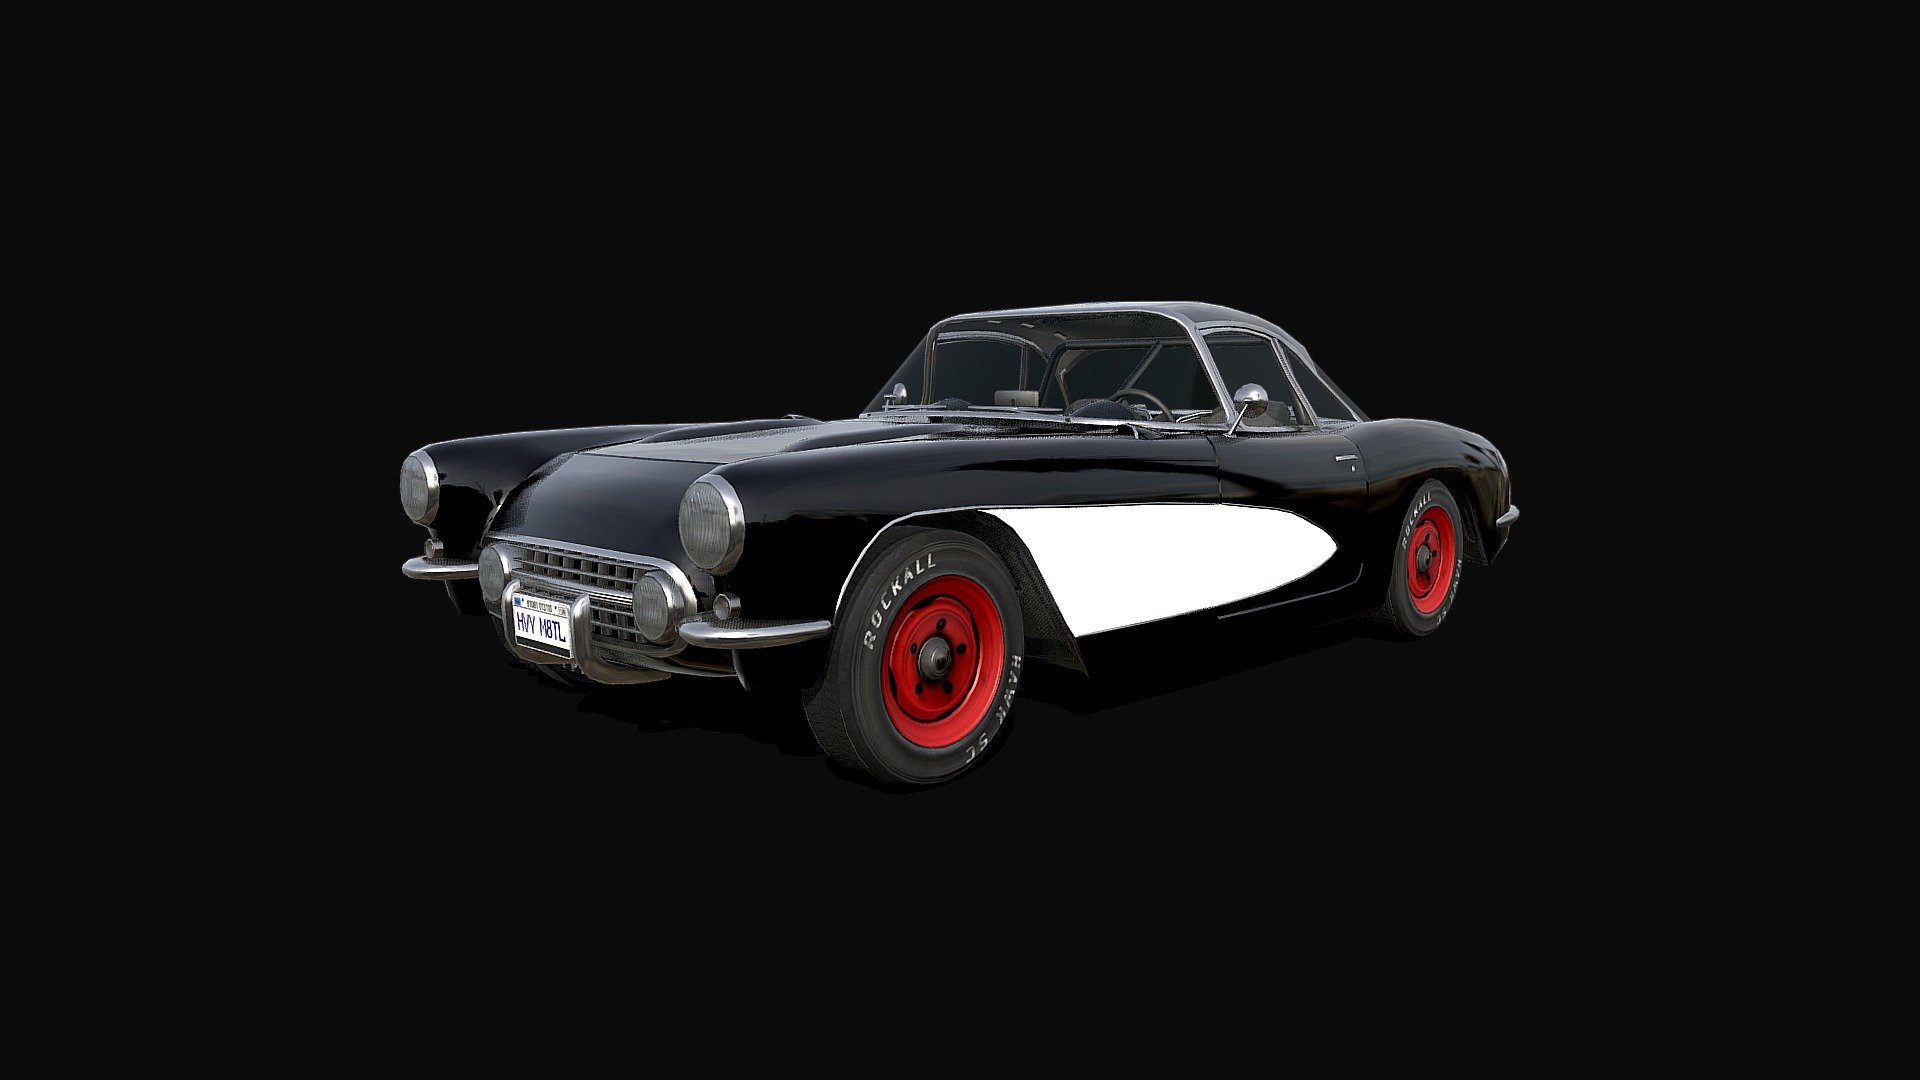 Basicly its 57 Vette model. I modeled different rear bumpers, more simular to later 58 vette and slightly change roofline.

1.04.2021 Update. Body geometry has been improved, detailed interior has been added, wheels improved and much more. Use the model as you see fit and have a nice day 3d model